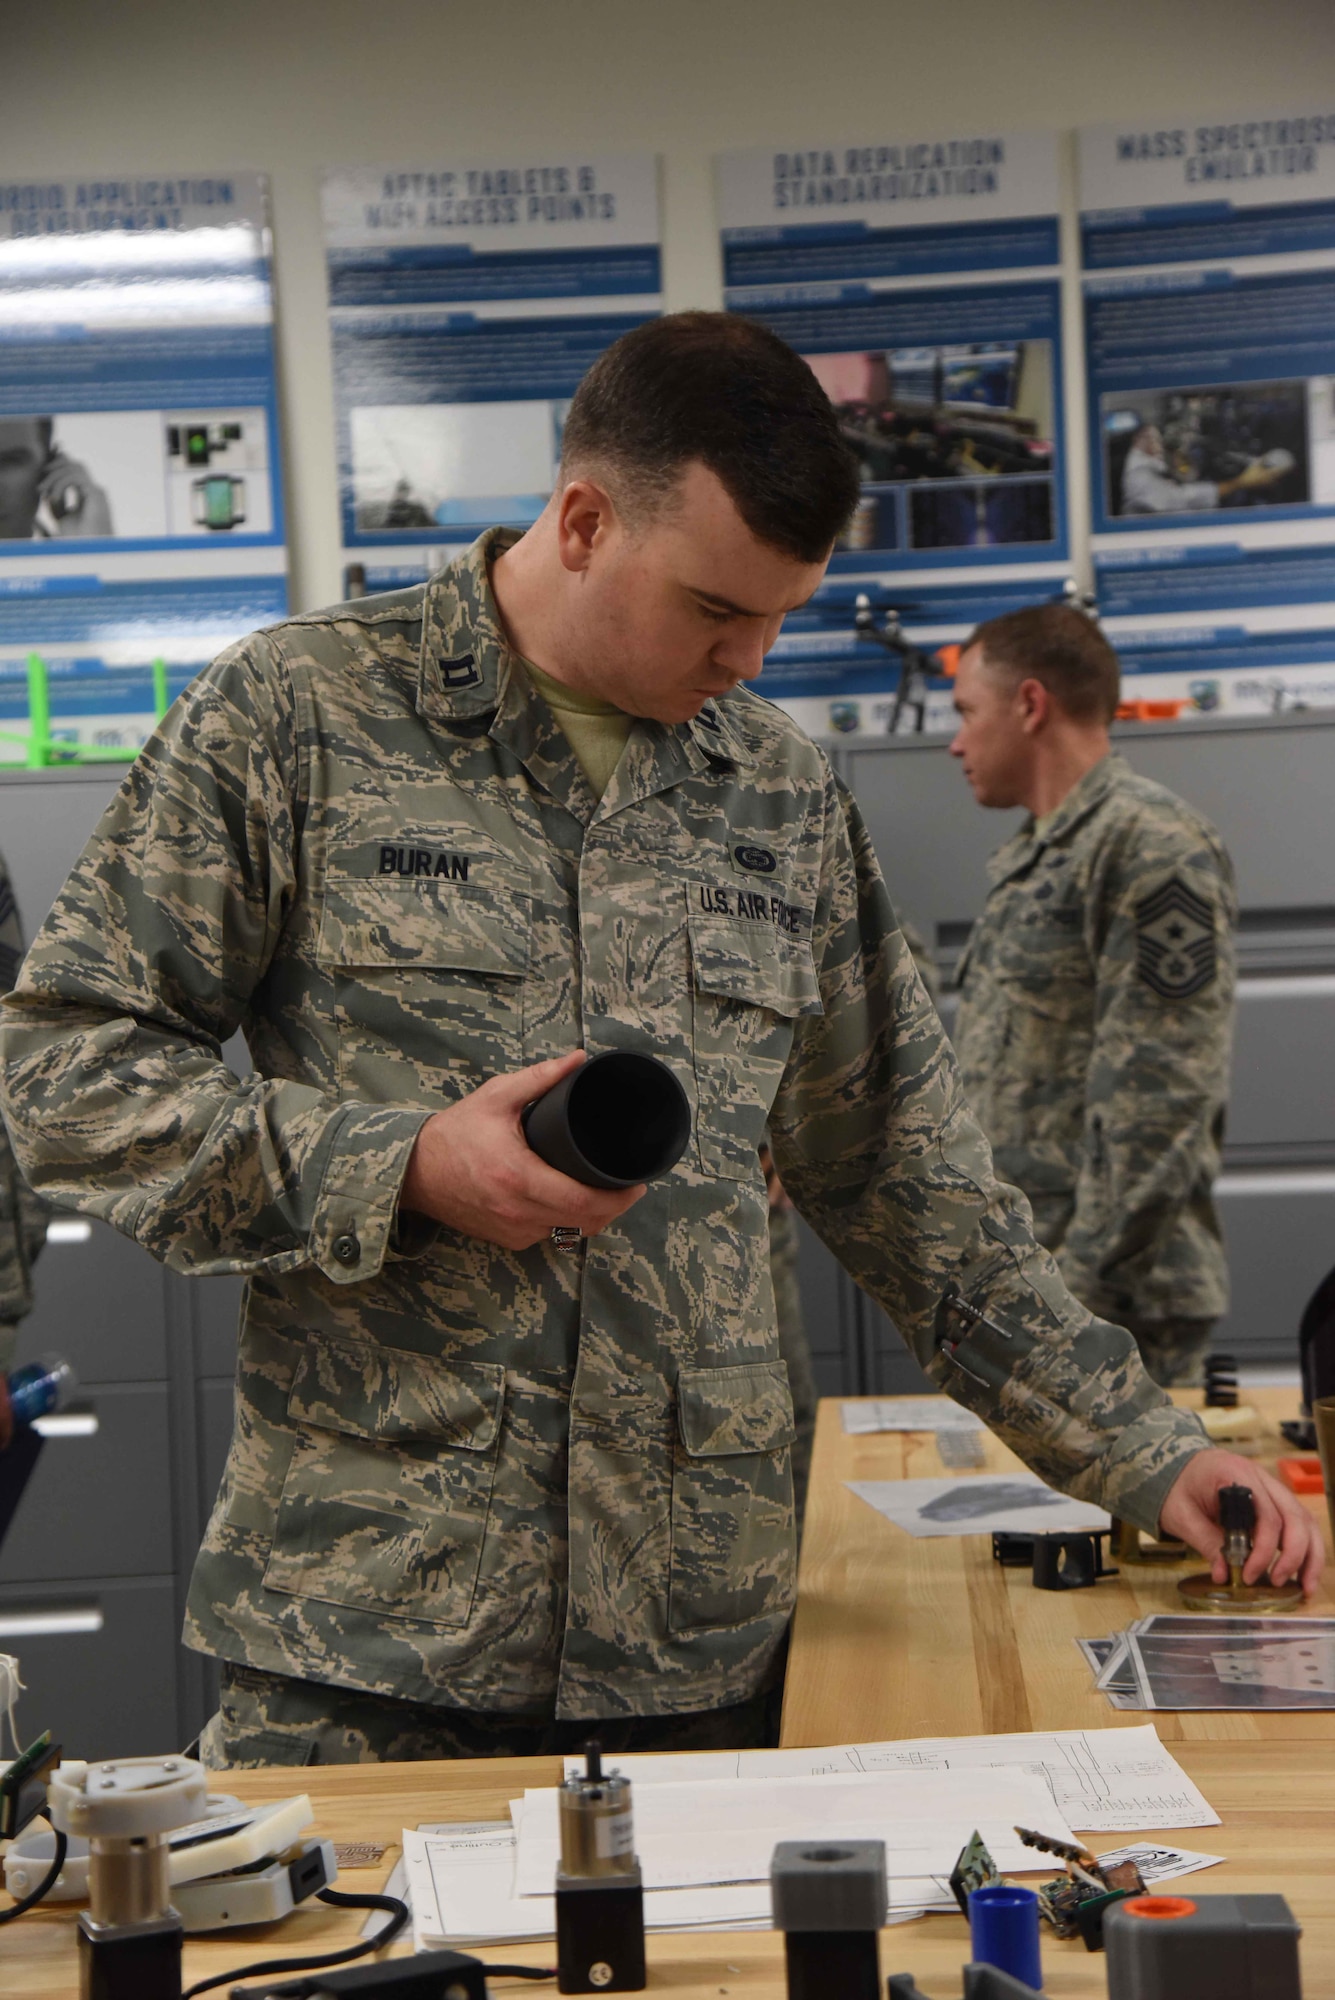 Capt. Corey Buran, an assistant director of operations at the 363rd Intelligence, Surveillance and Reconnaissance Wing, Langley AFB, Va., examines some projects produced by members of the Air Force Technical Applications Center's Innovation Lab during a visit June 1, 2018.  Buran was one of 35 Airmen within the ISR community to visit the nuclear treaty monitoring center at Patrick AFB, Fla., to learn more about how AFTAC employs innovation to improve its processes.   (U.S. Air Force photo by Susan A. Romano)